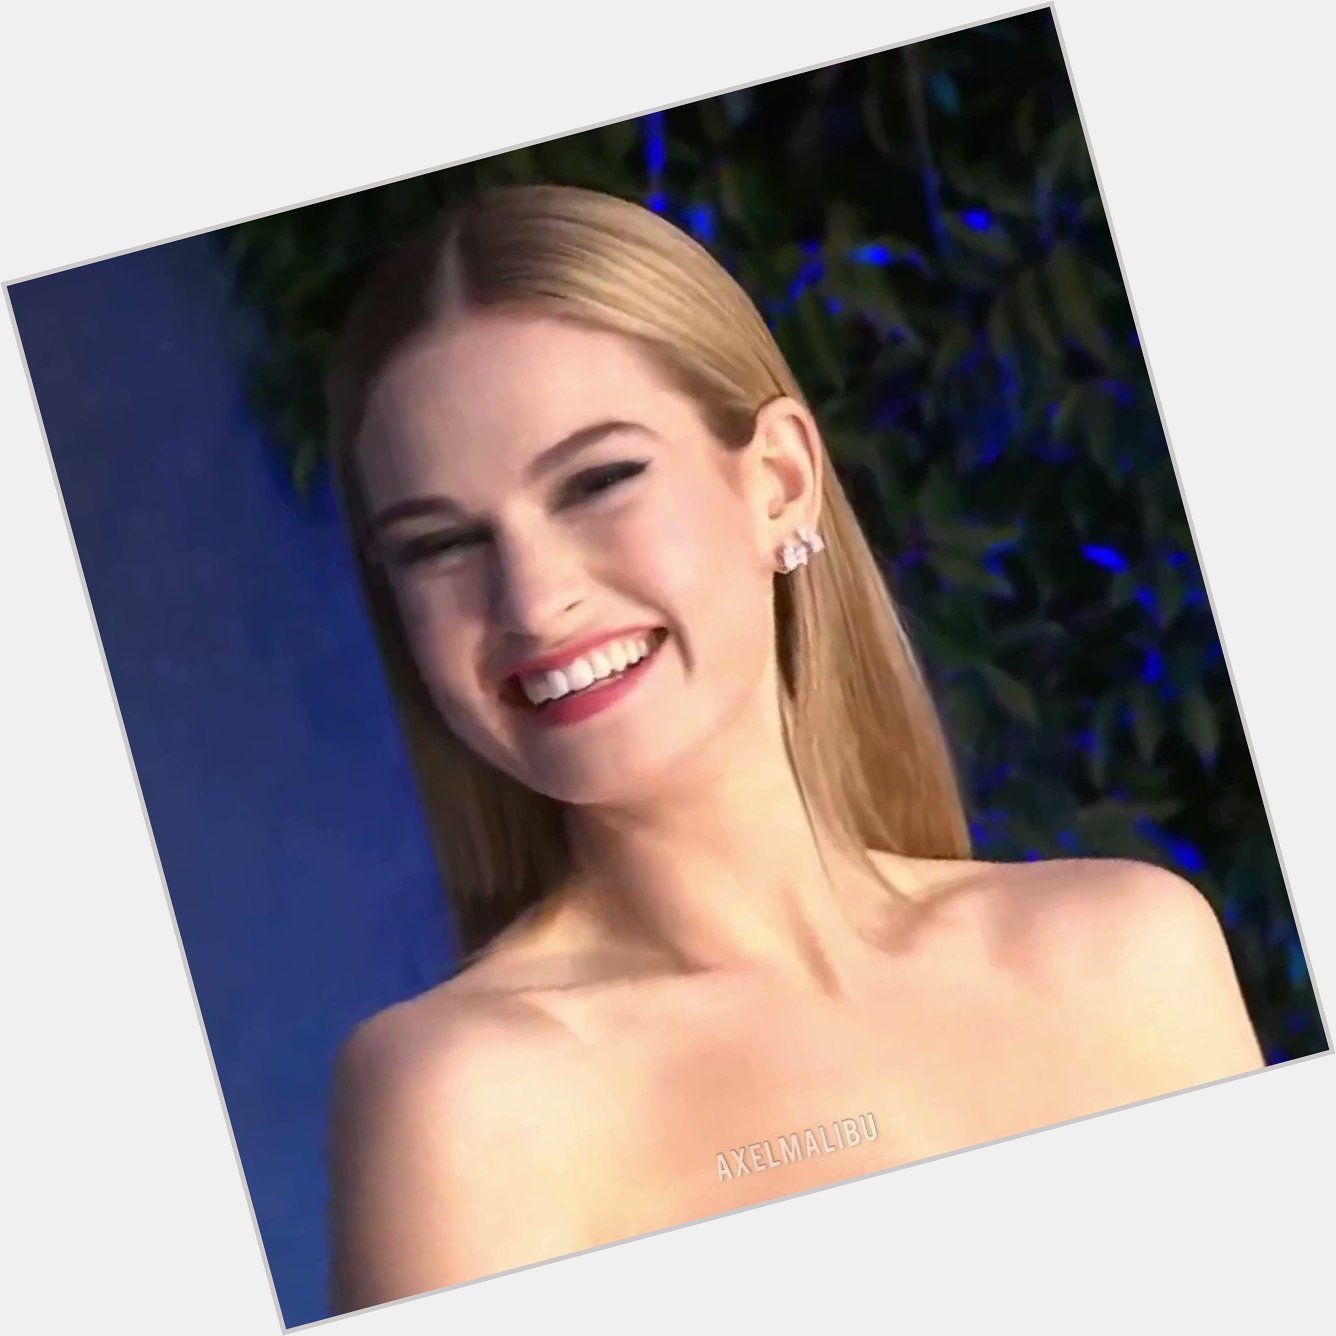 Happy birthday Lily James! I peaked with this Cinderella premiere edit, but I ll be making some more in May 